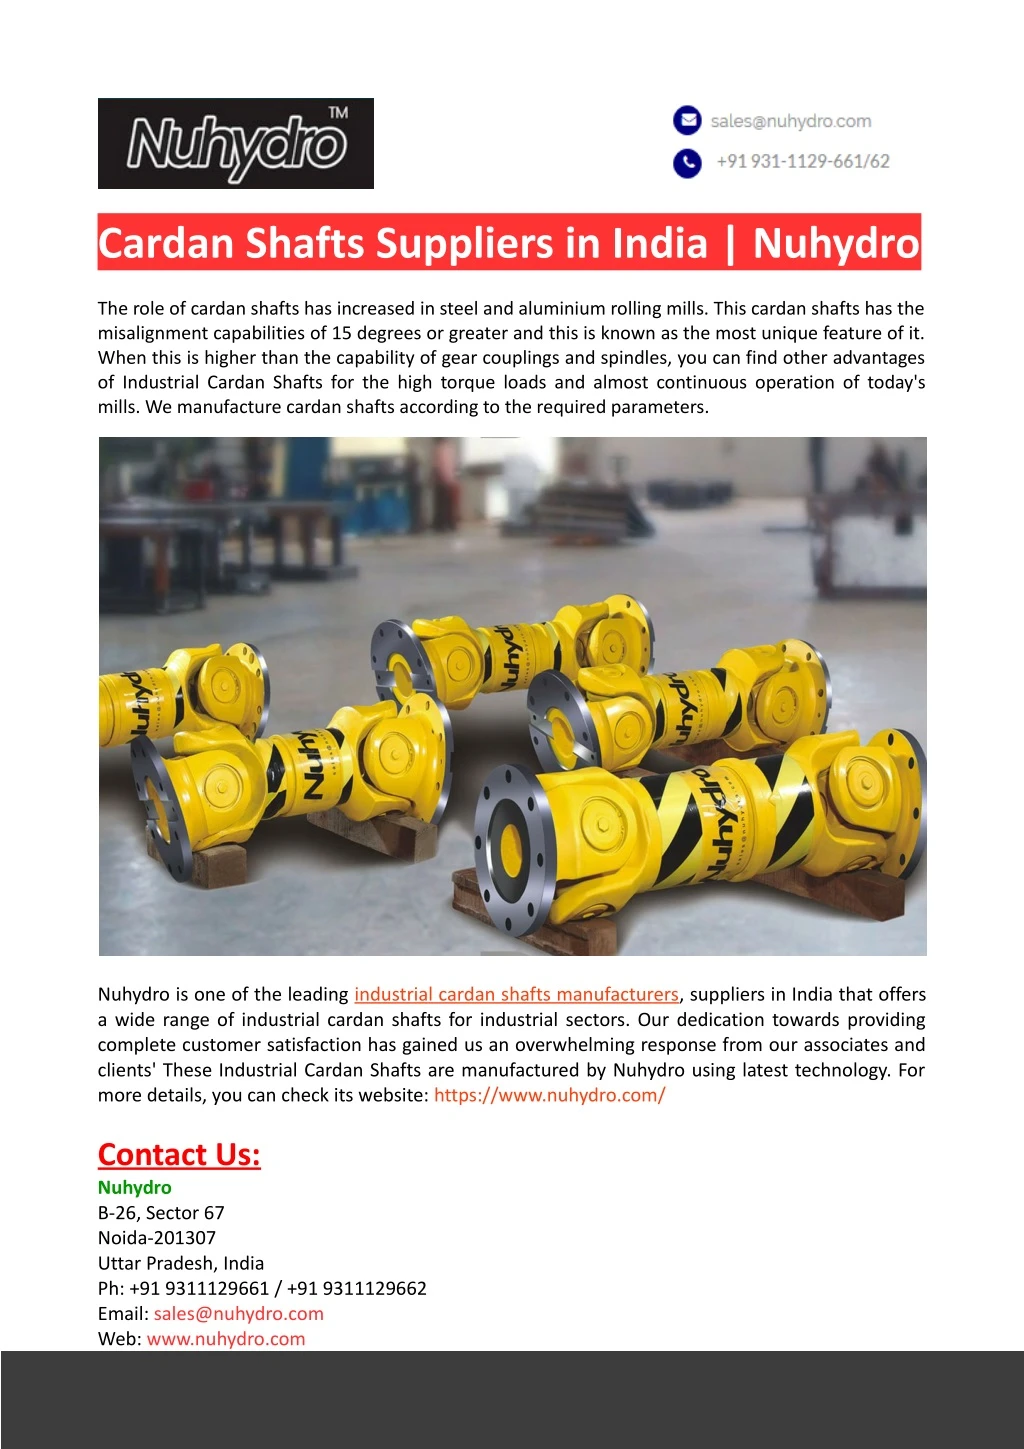 cardan shafts suppliers in india nuhydro